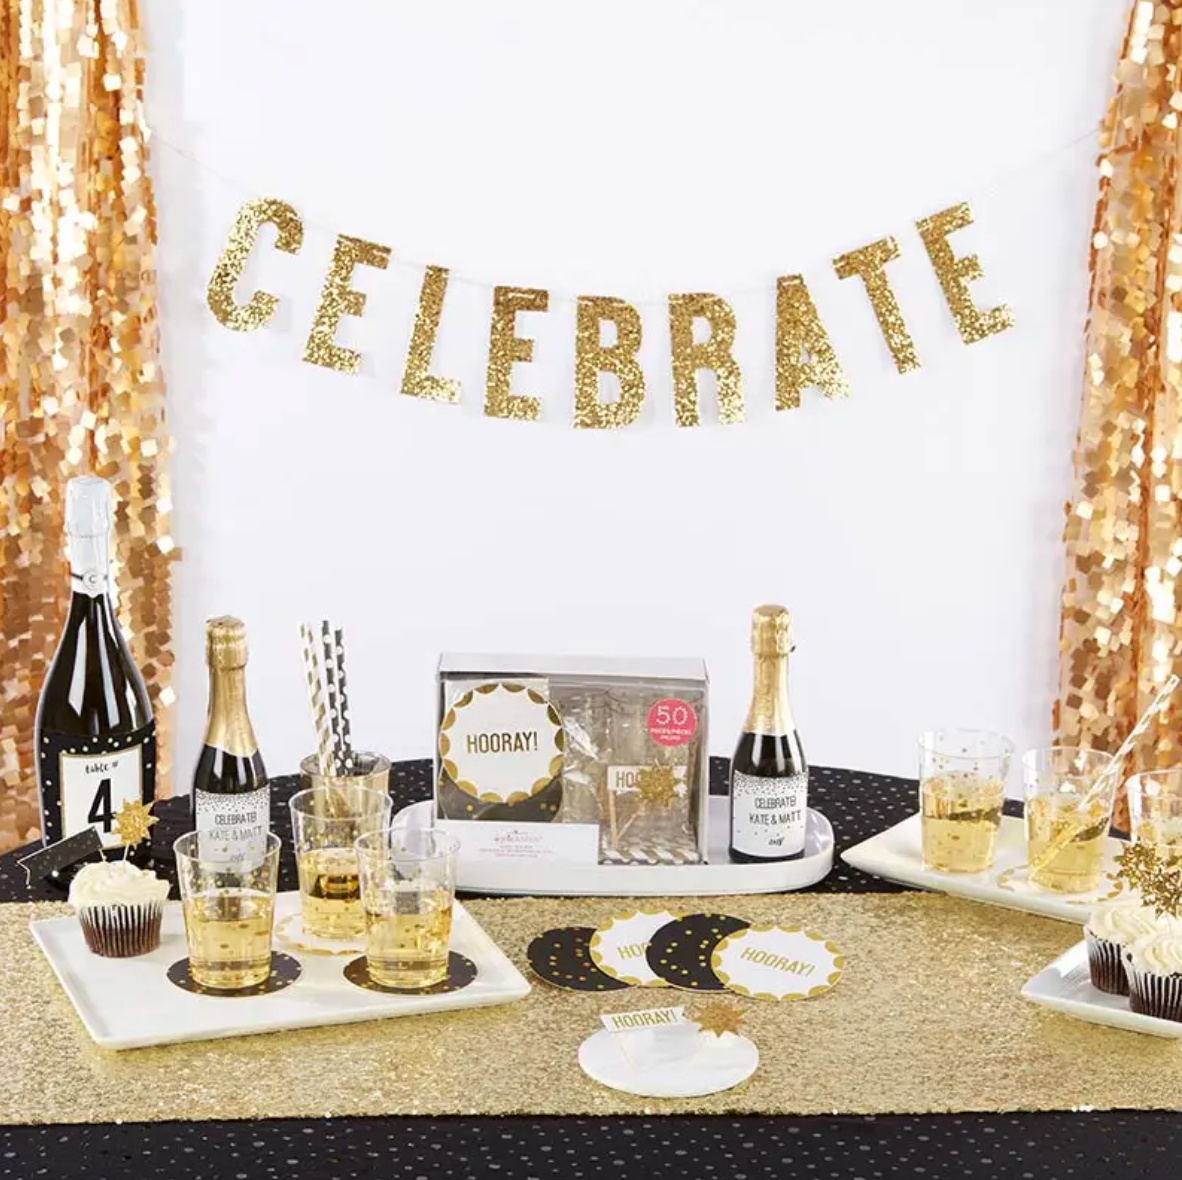 Celebrate! 50-Piece Party in a Box